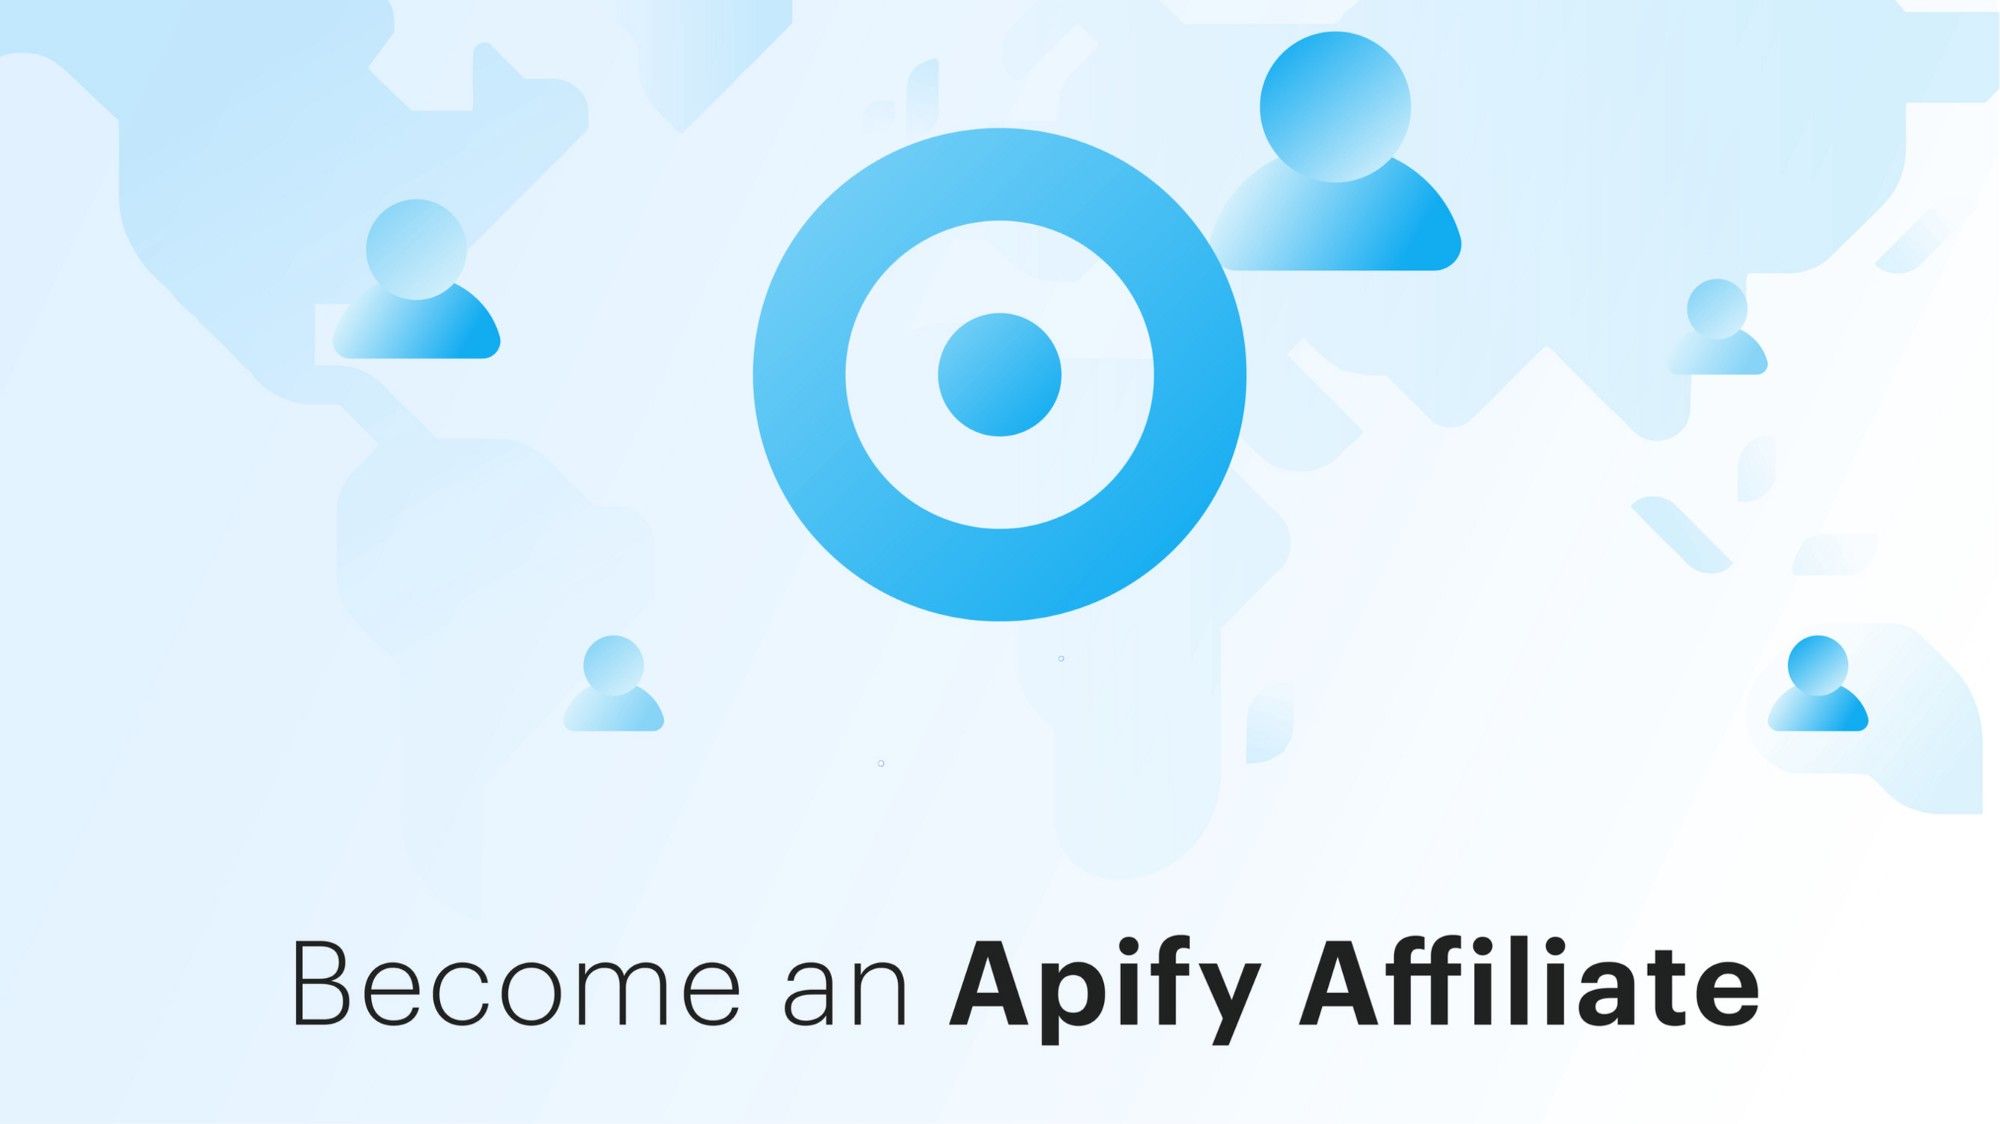 person and target icons with the title "Become an Apify Affiliate"